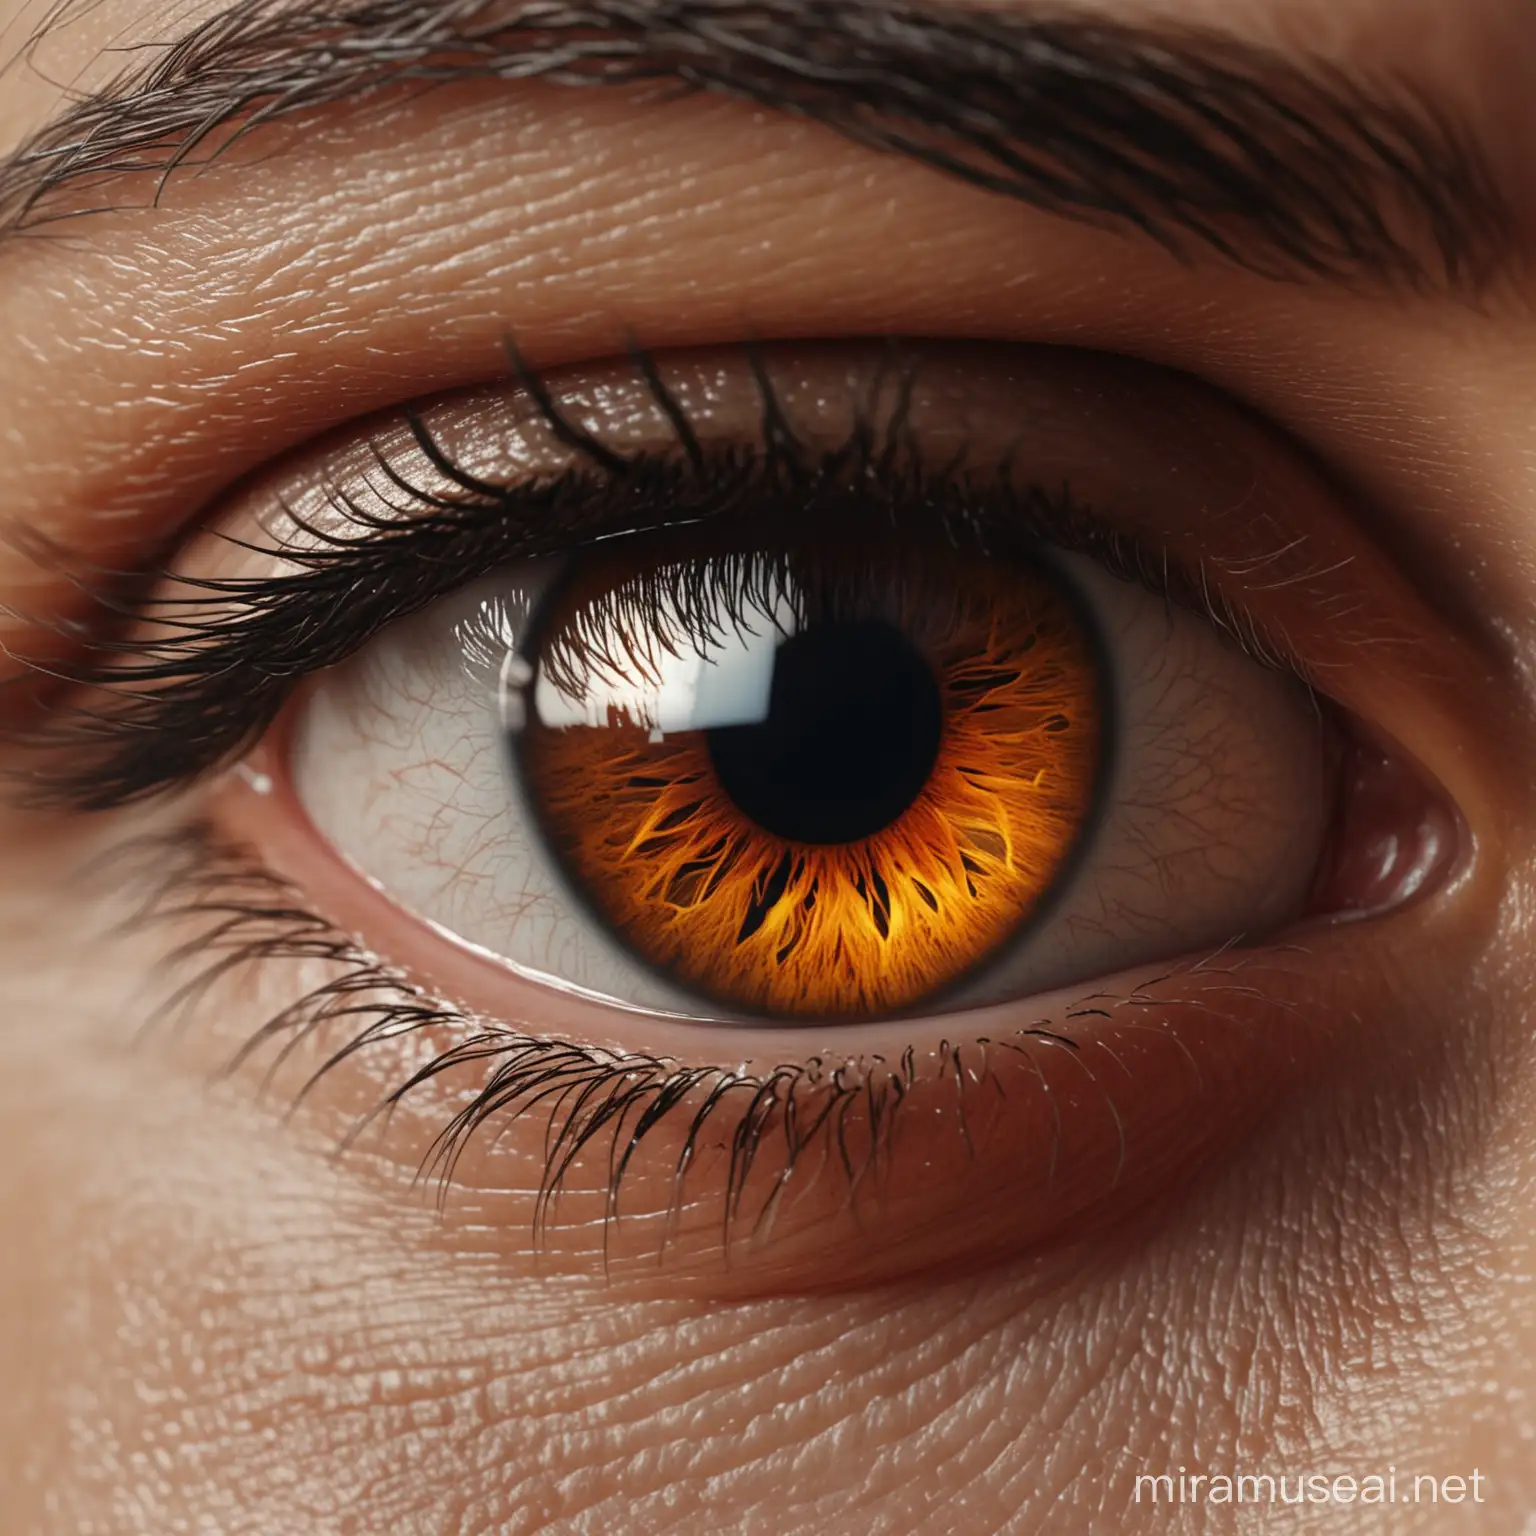 a close up detail of a fierce fiery eye looking into the camera. reflection of may people, 
hyper realistic, 8k